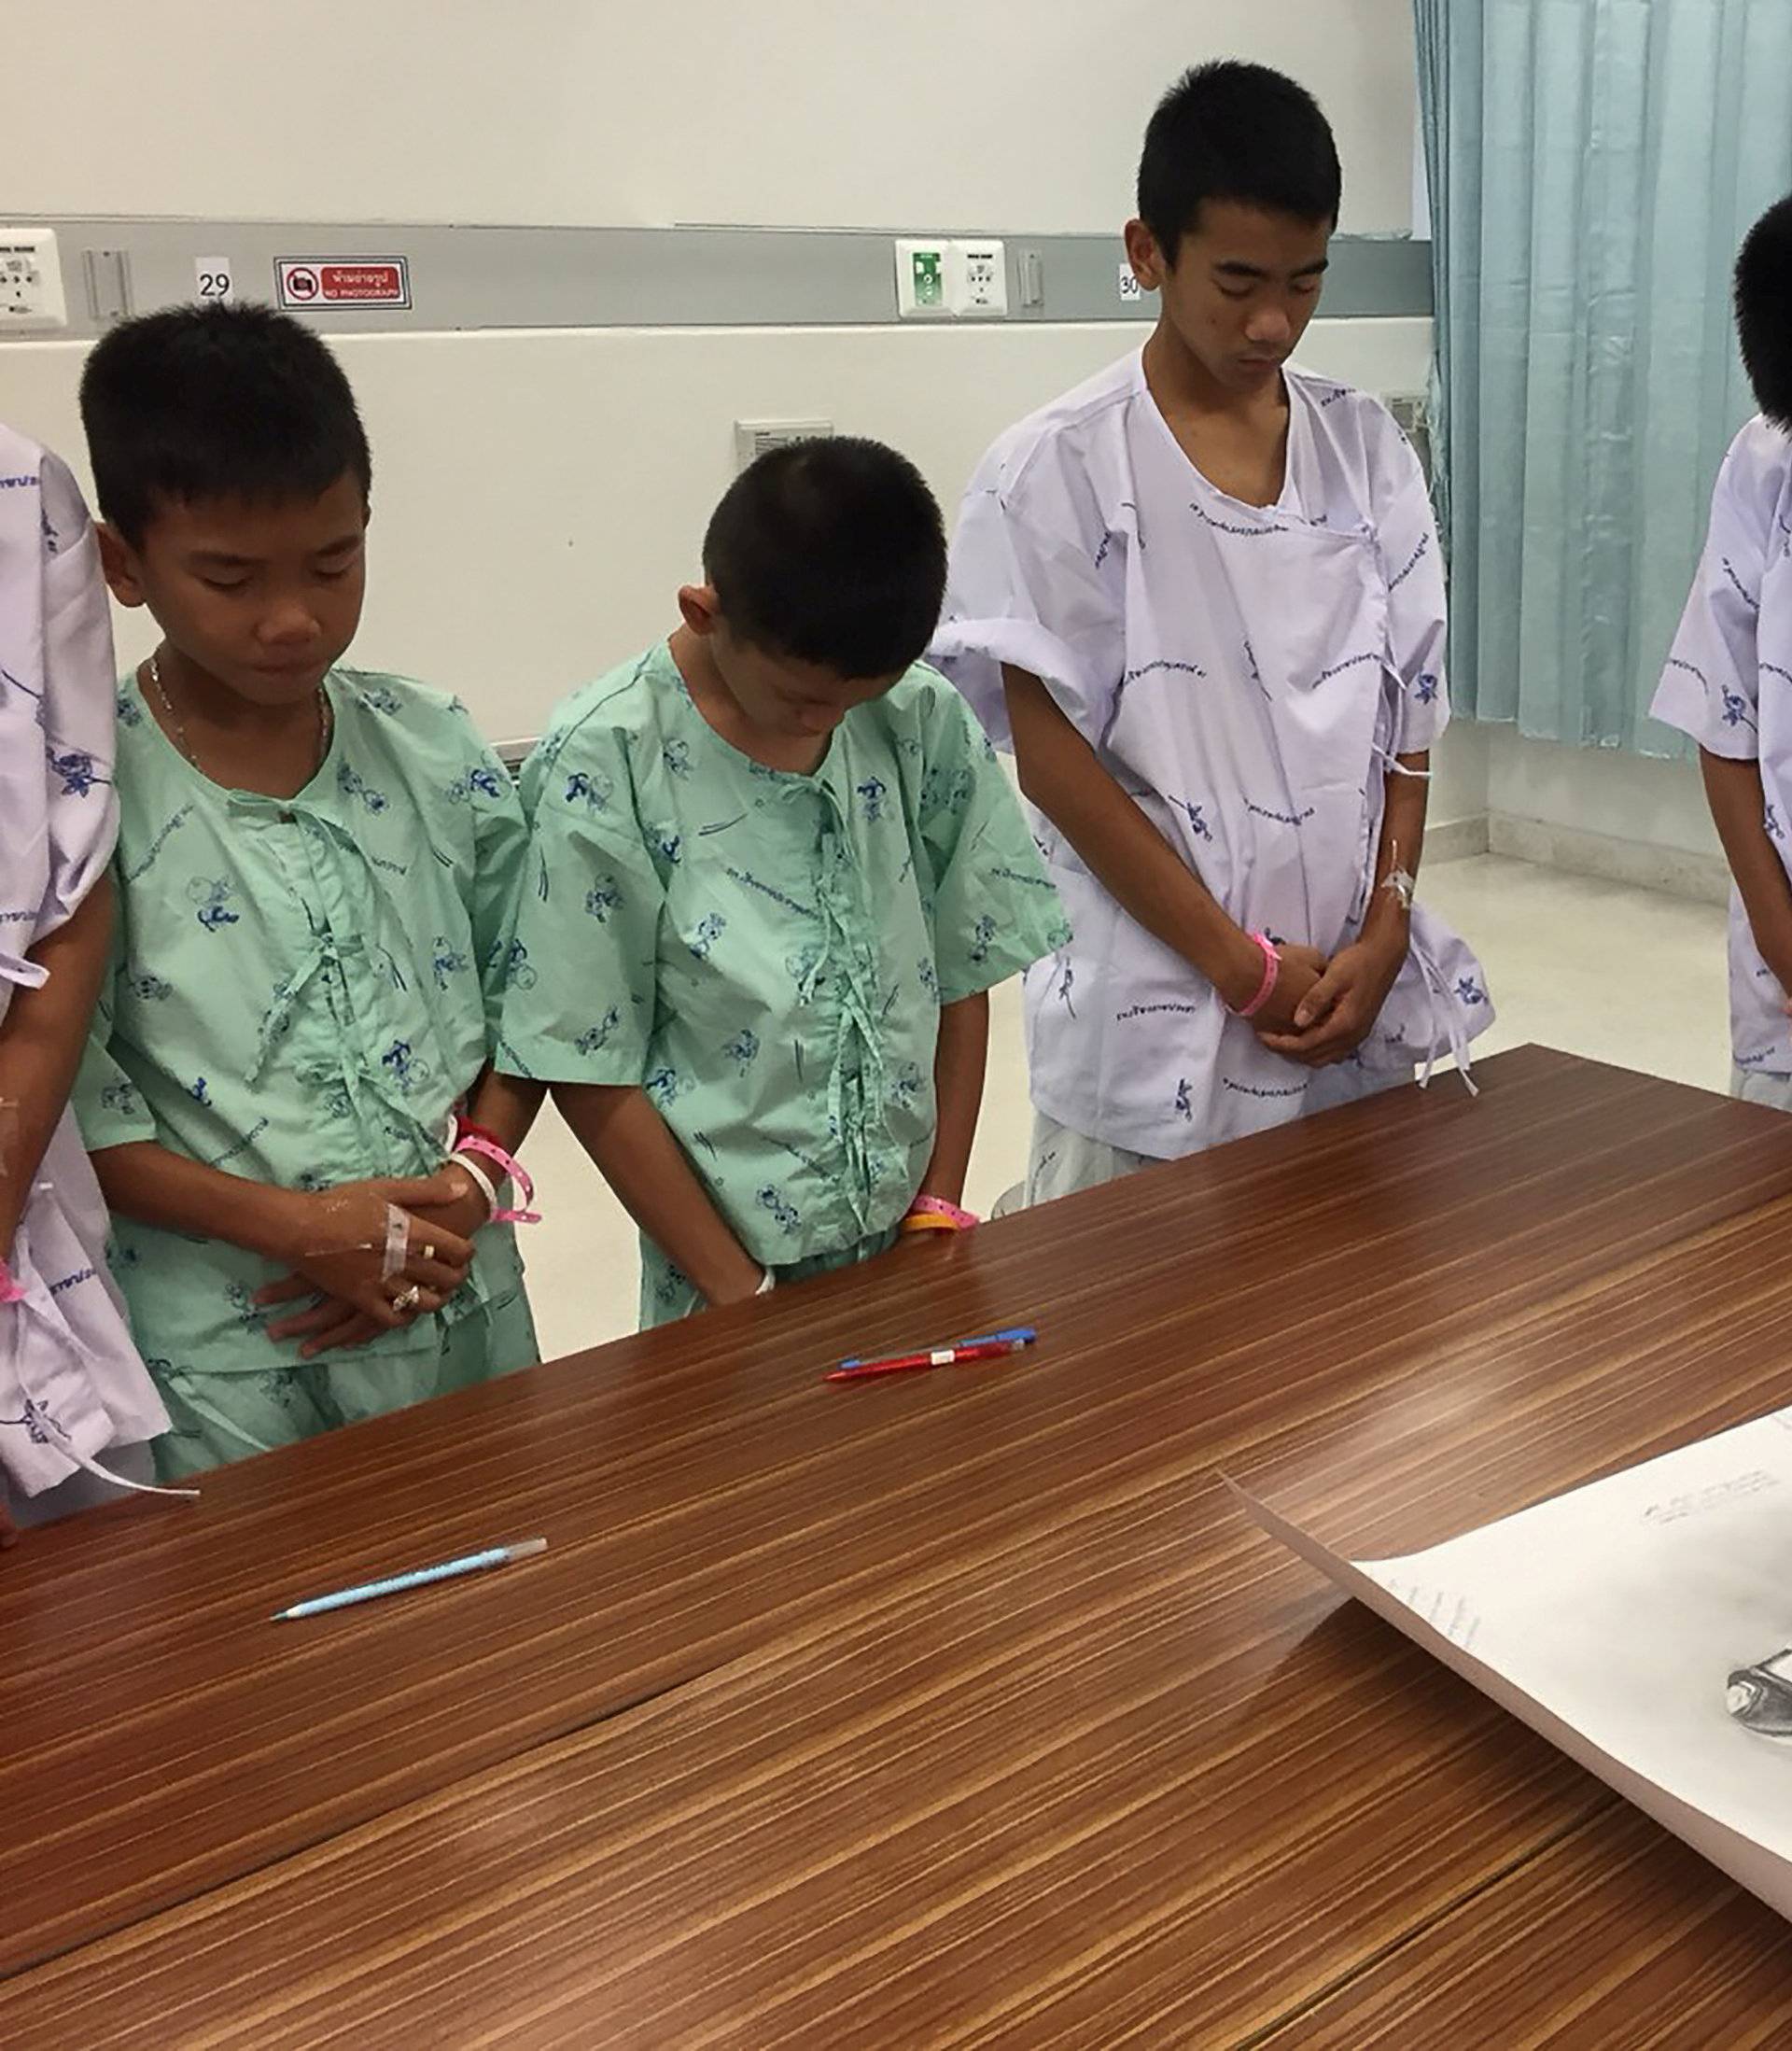 Members of "Wild Boars" soccer team and their coach rescued from a flooded cave bow their heads after writing messages on a drawing picture of Samarn Kunan at the Chiang Rai Prachanukroh Hospital